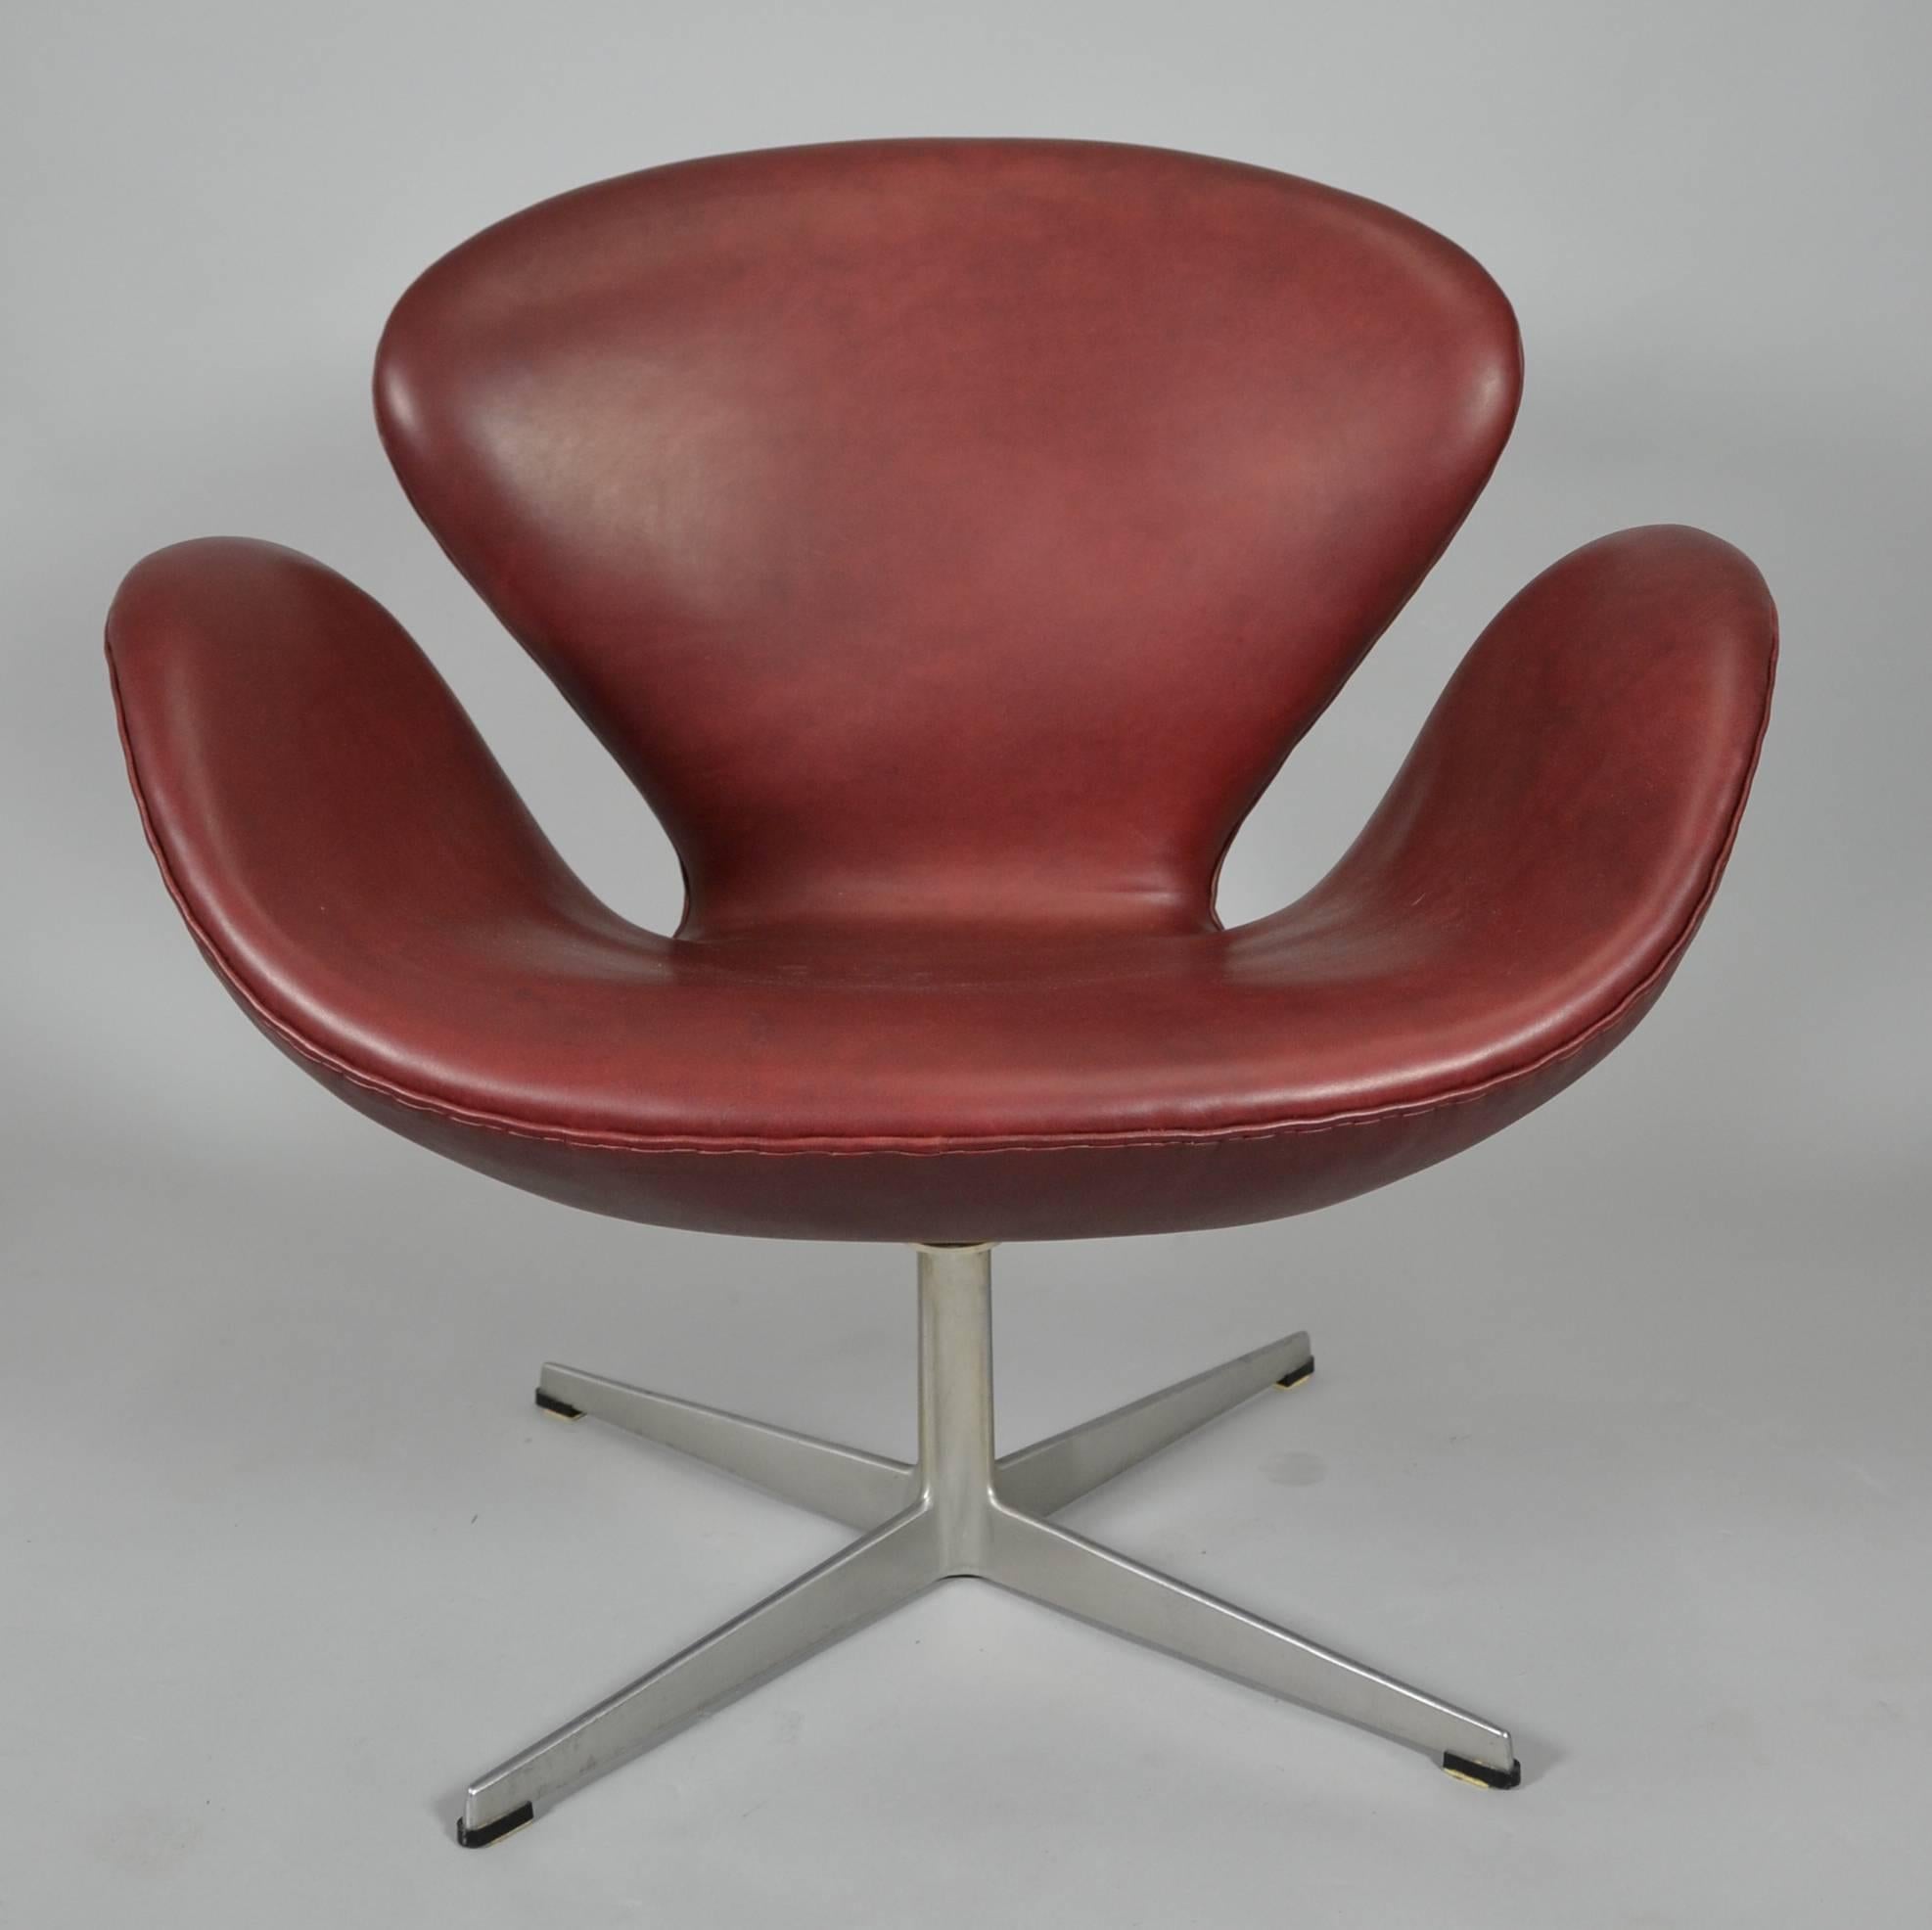 Mid-Century Modern Pair of Swan Chairs by Arne Jacobsen in Bordeaux Leather